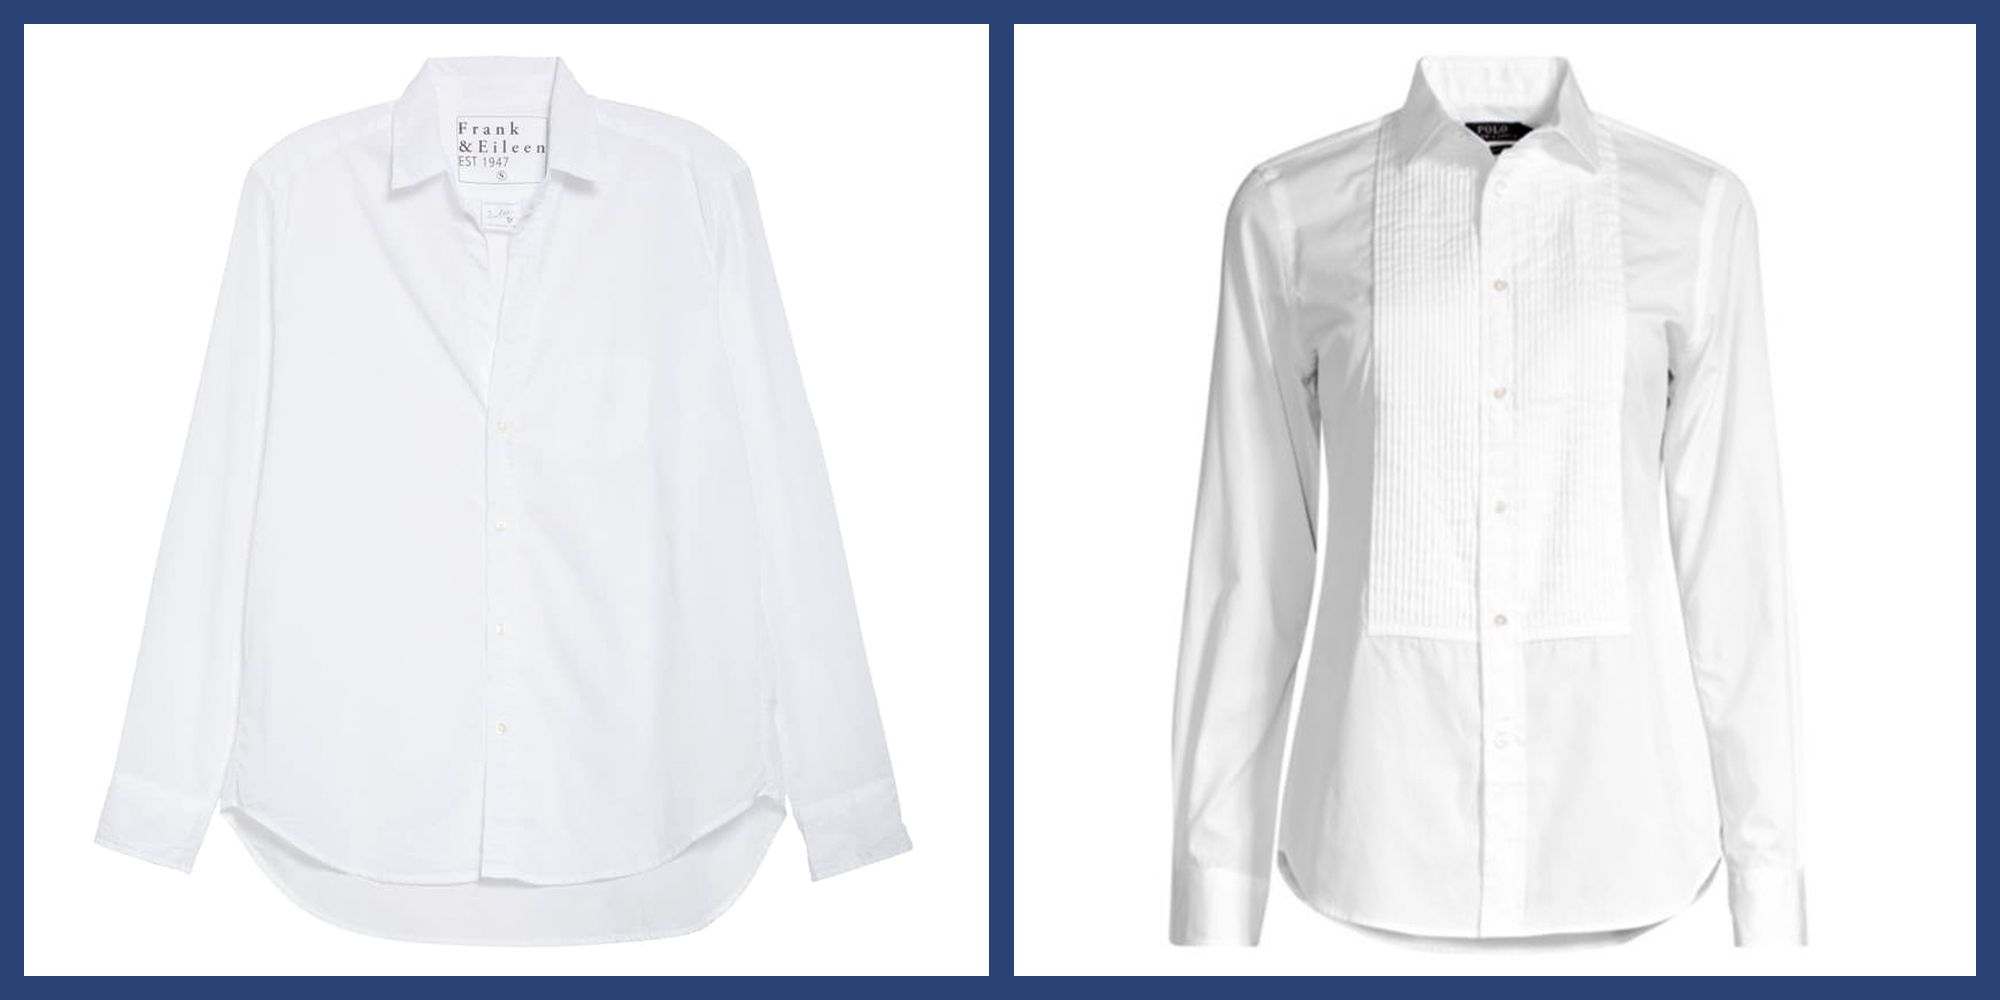 16 Best Button-Down Shirts for Women to Shop in 2023